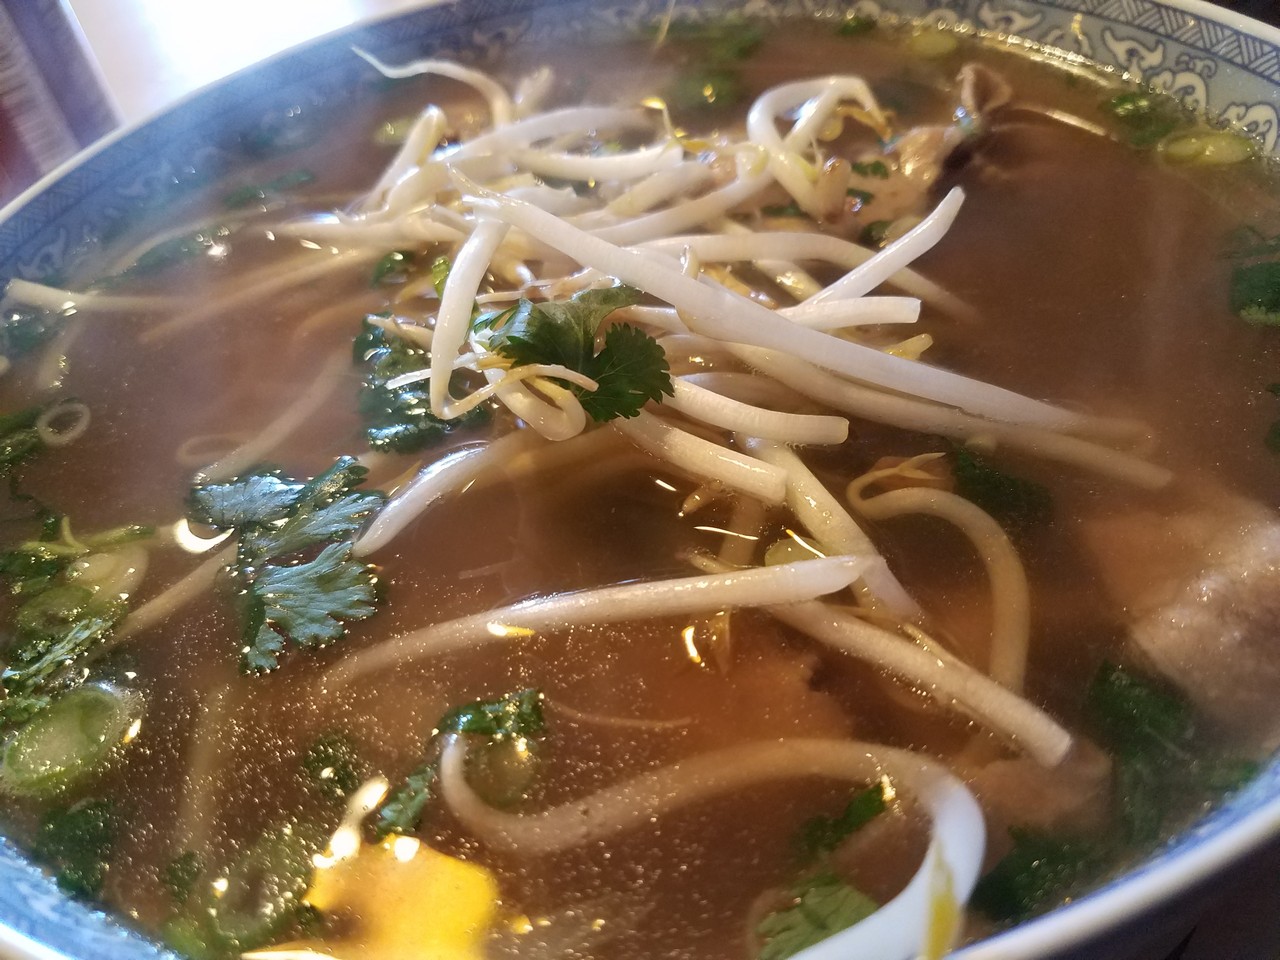 Phở or pho (pronounced variously as /fʌ/, /fə/, /fər/, or /foʊ/ so please stop messaging me that it’s not pronounced pho! I get it, we all get it but choose to remain ignorant for the sake of levity.